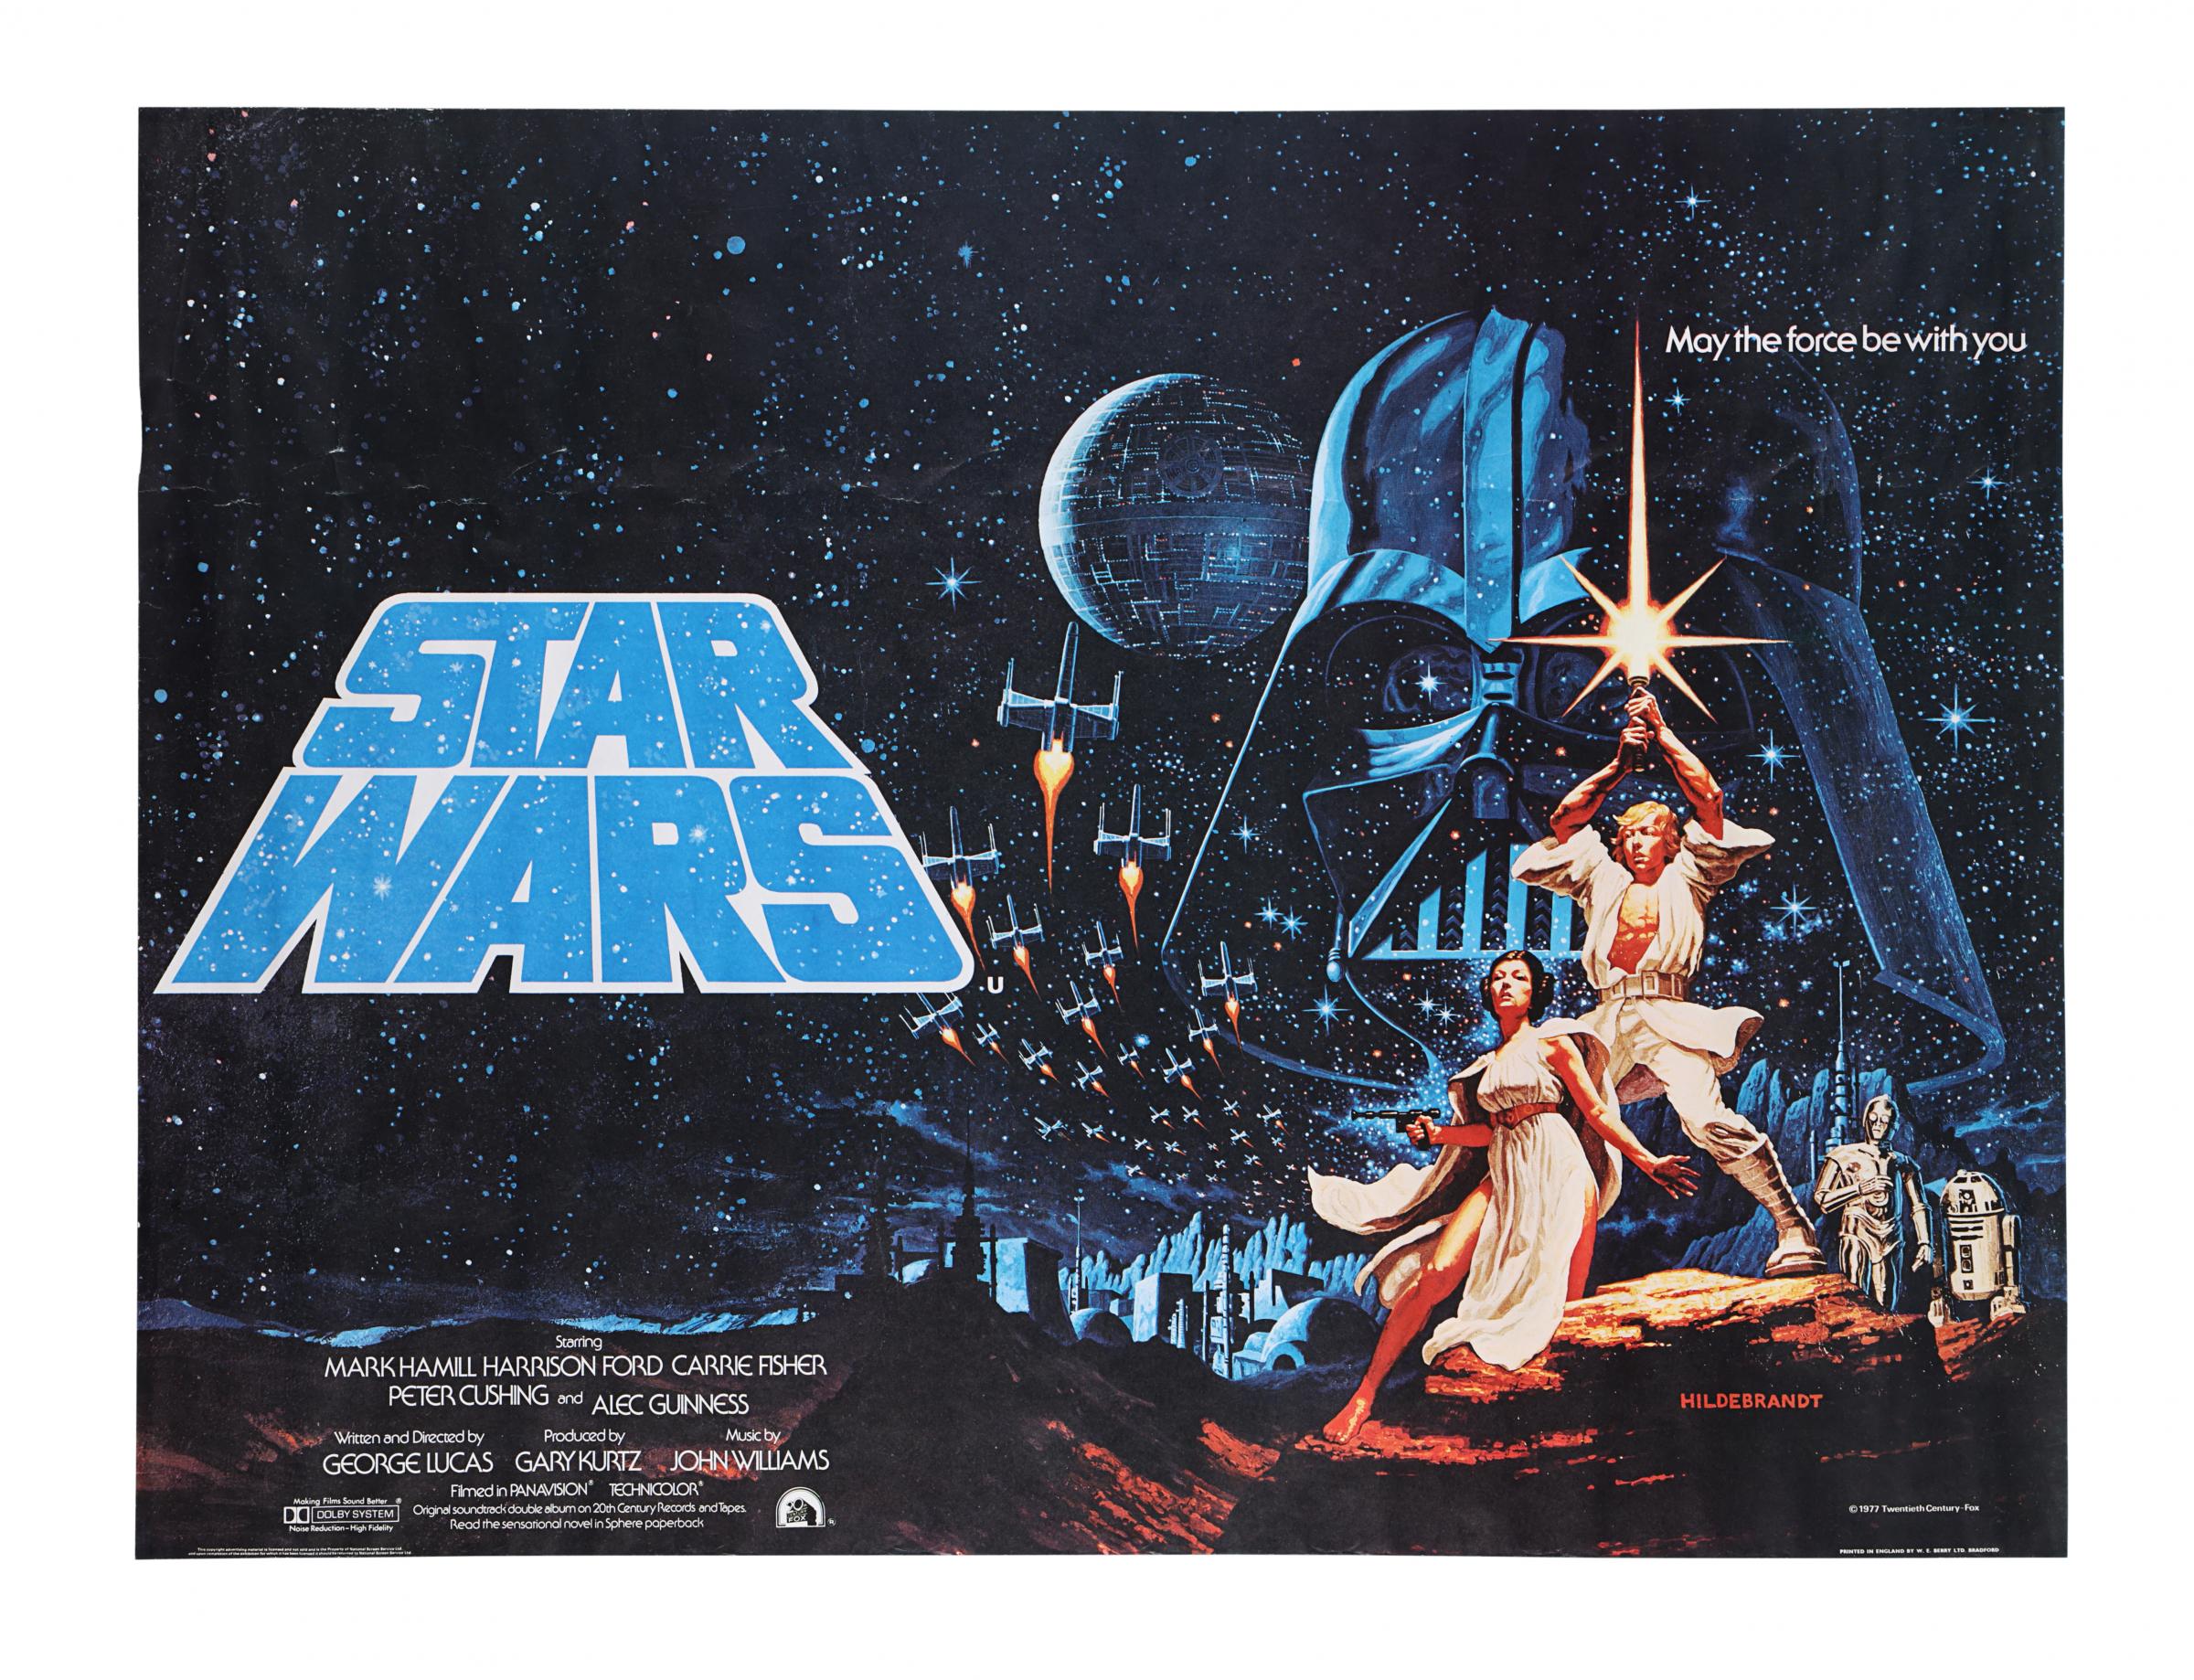 The rare Star Wars poster that will be auctioned. Credit: PA